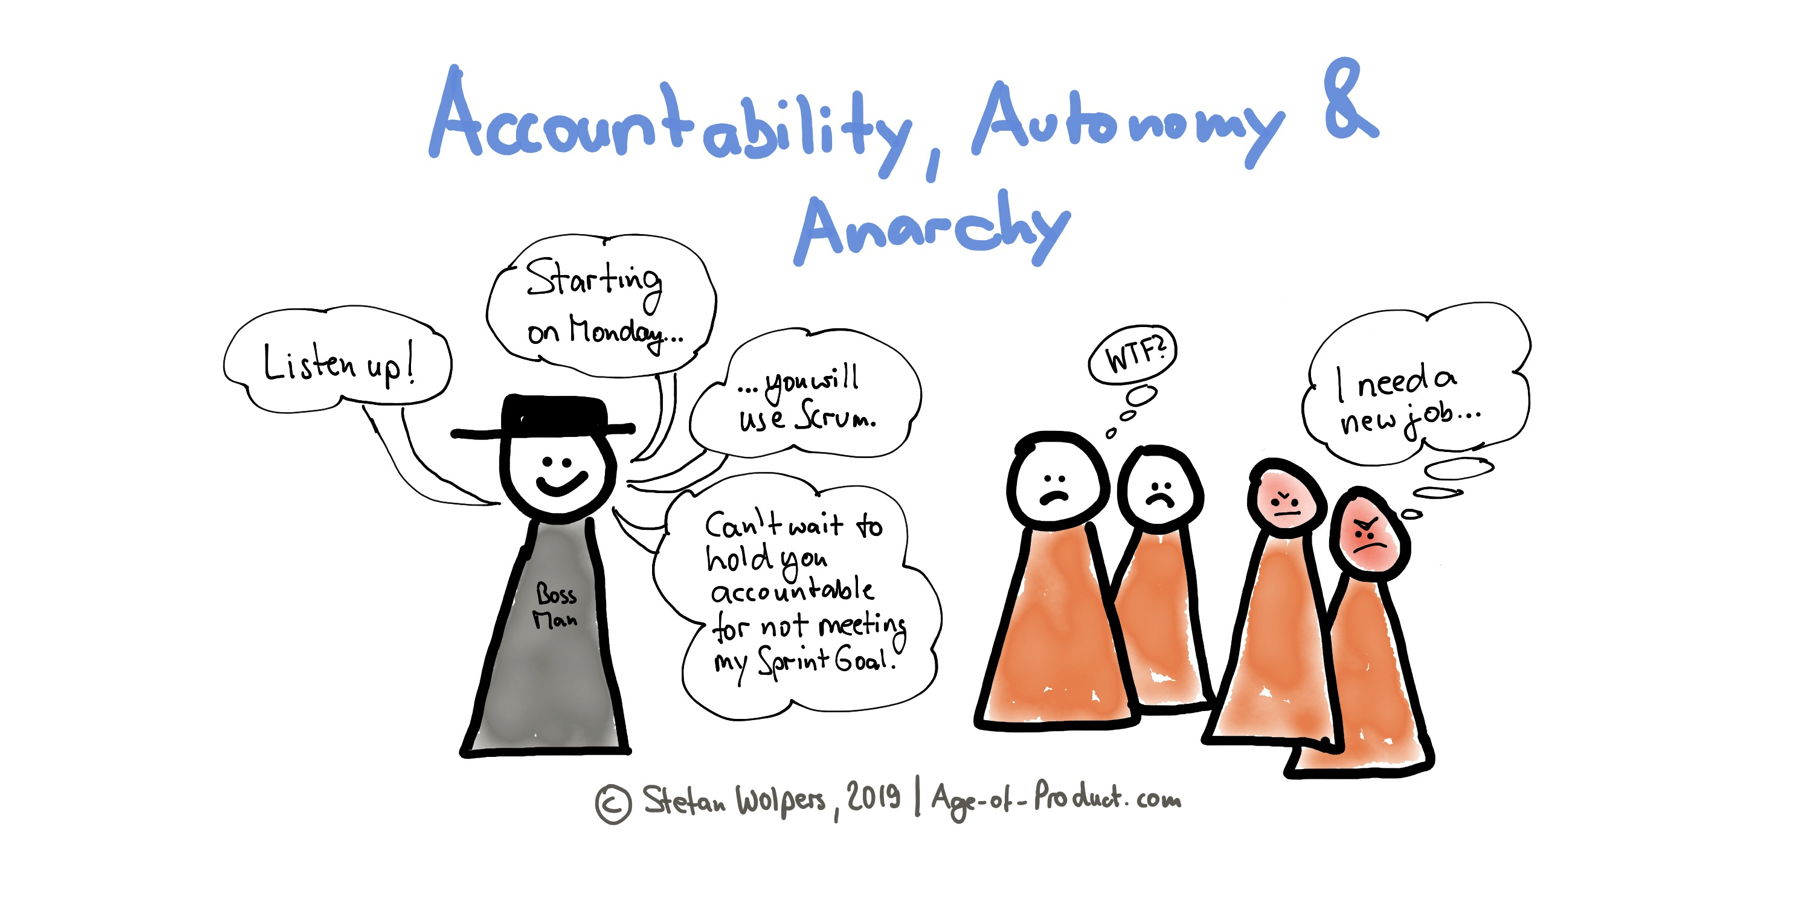 Scrum Accountability: The Boss imposes Scrum upon the Team — Berlin Product People GmbH